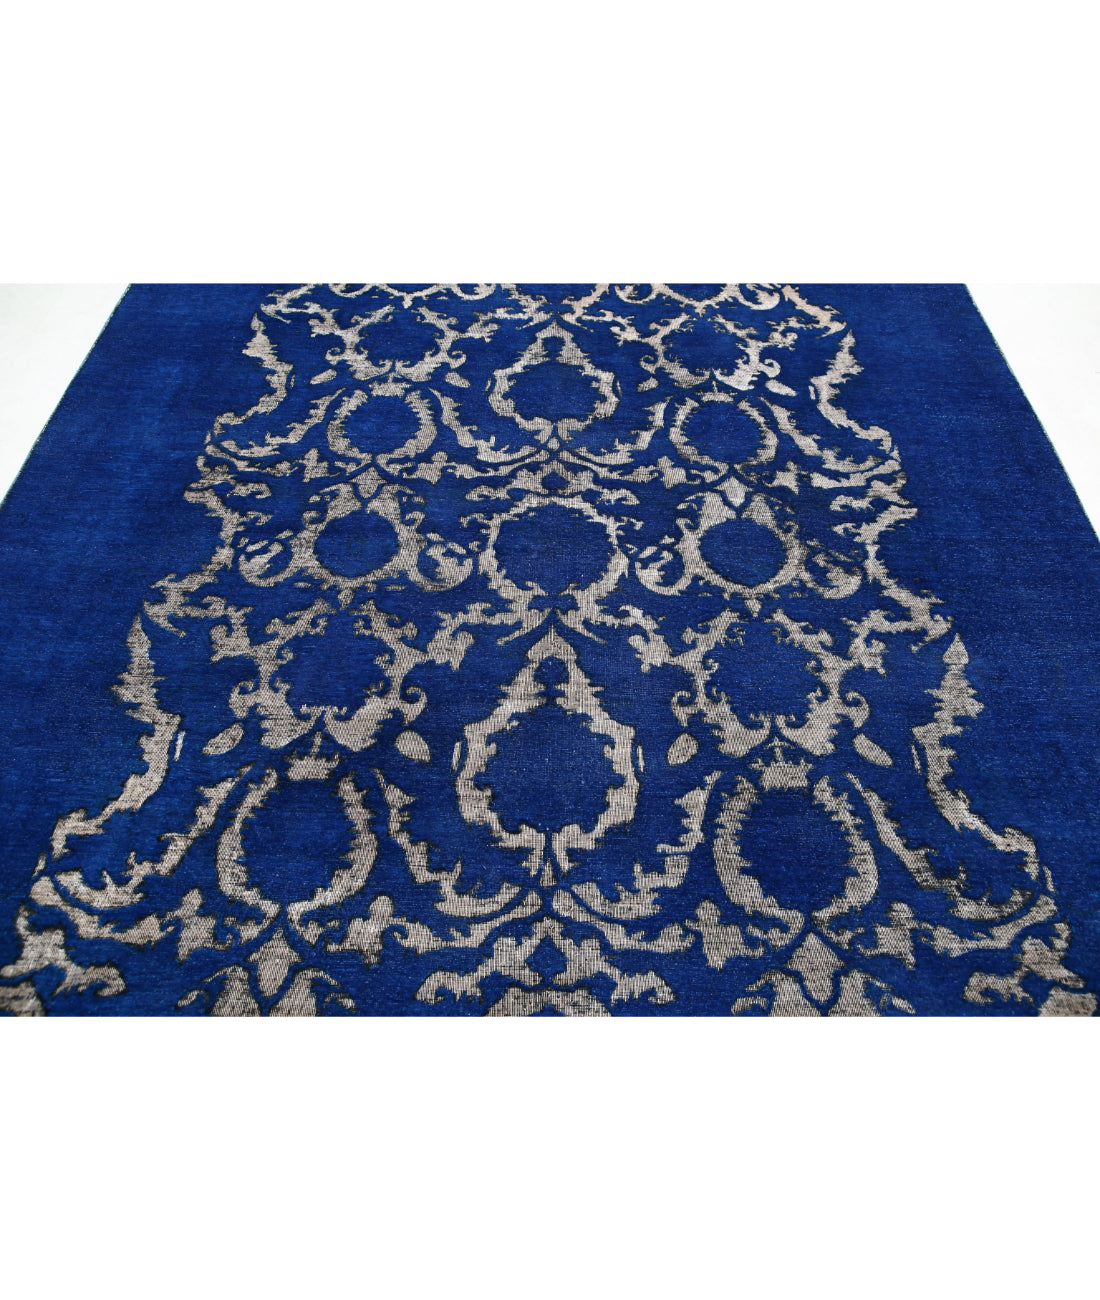 Hand Knotted Onyx Wool Rug - 7'9'' x 9'4'' 7'9'' x 9'4'' (233 X 280) / Blue / Blue